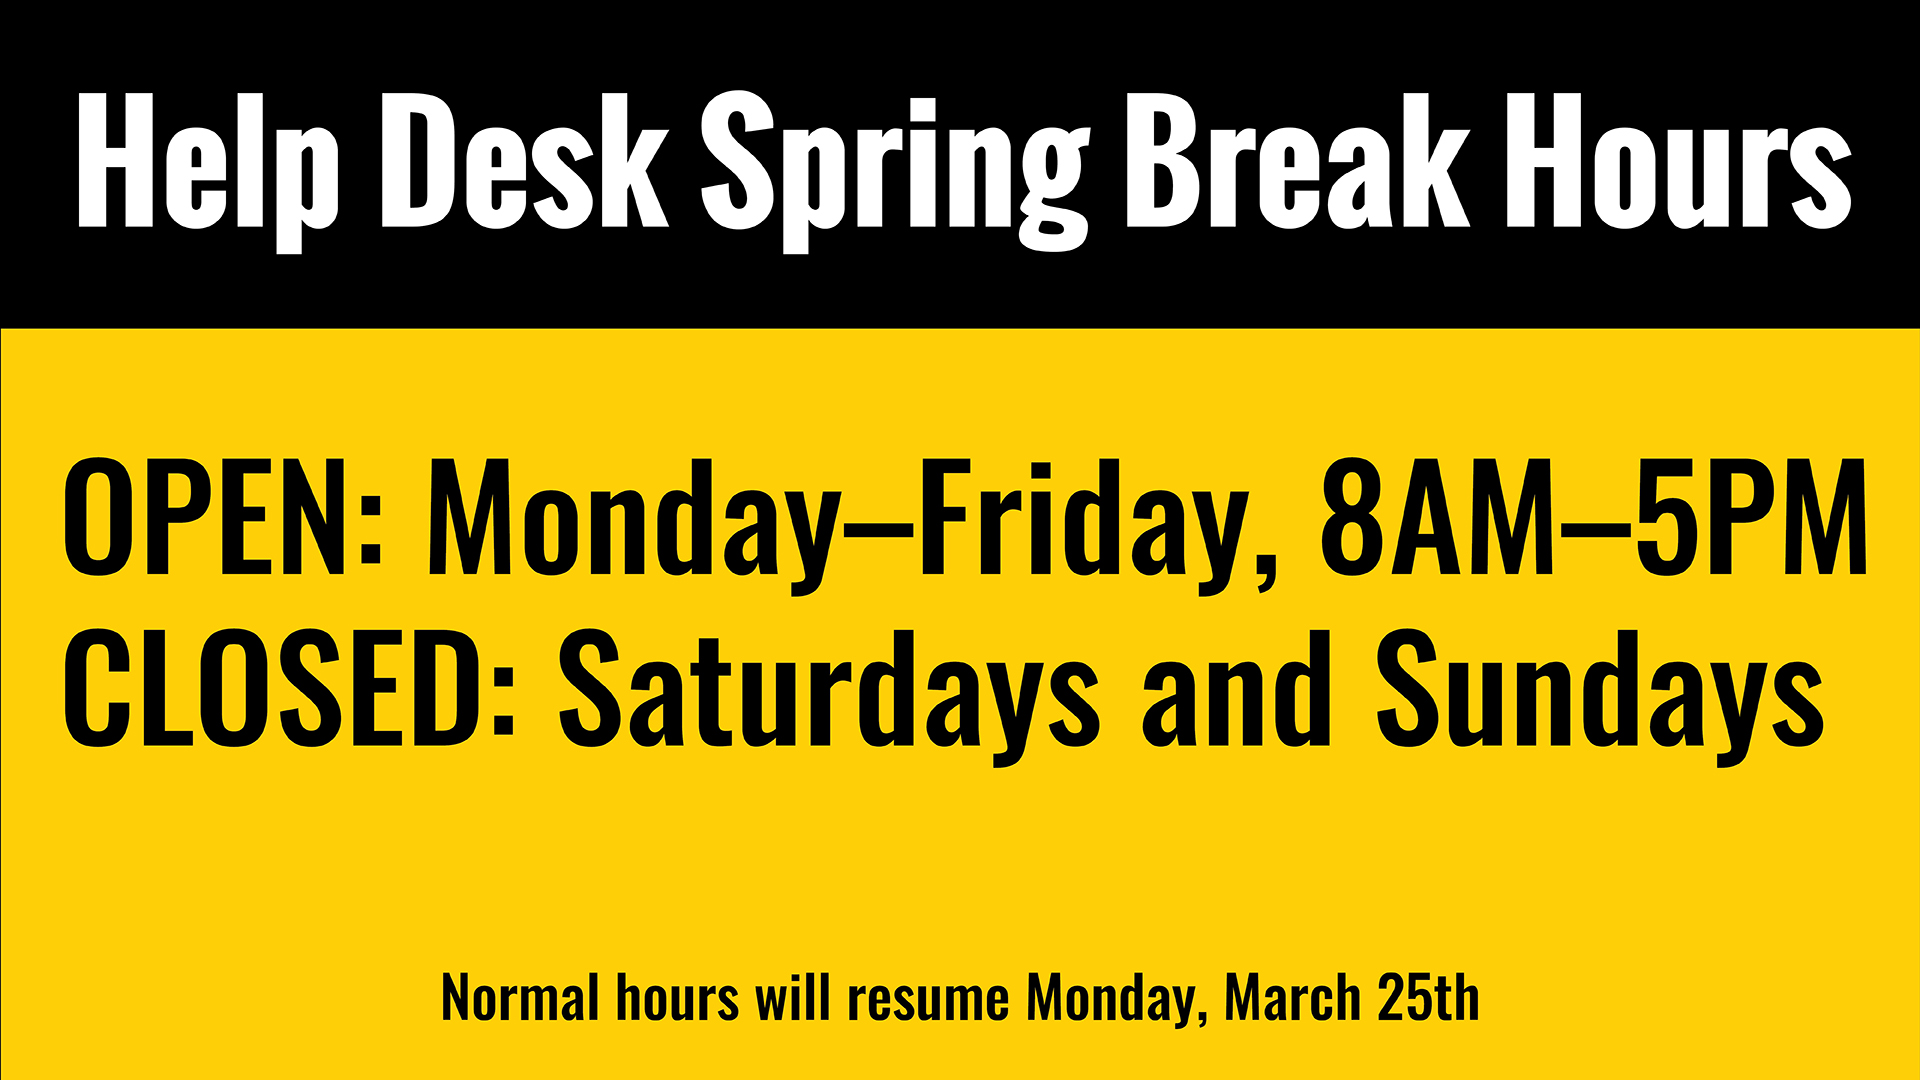 Help Desk Spring Break Hours Open Monday-Friday 8-5 closed saturday and sunday